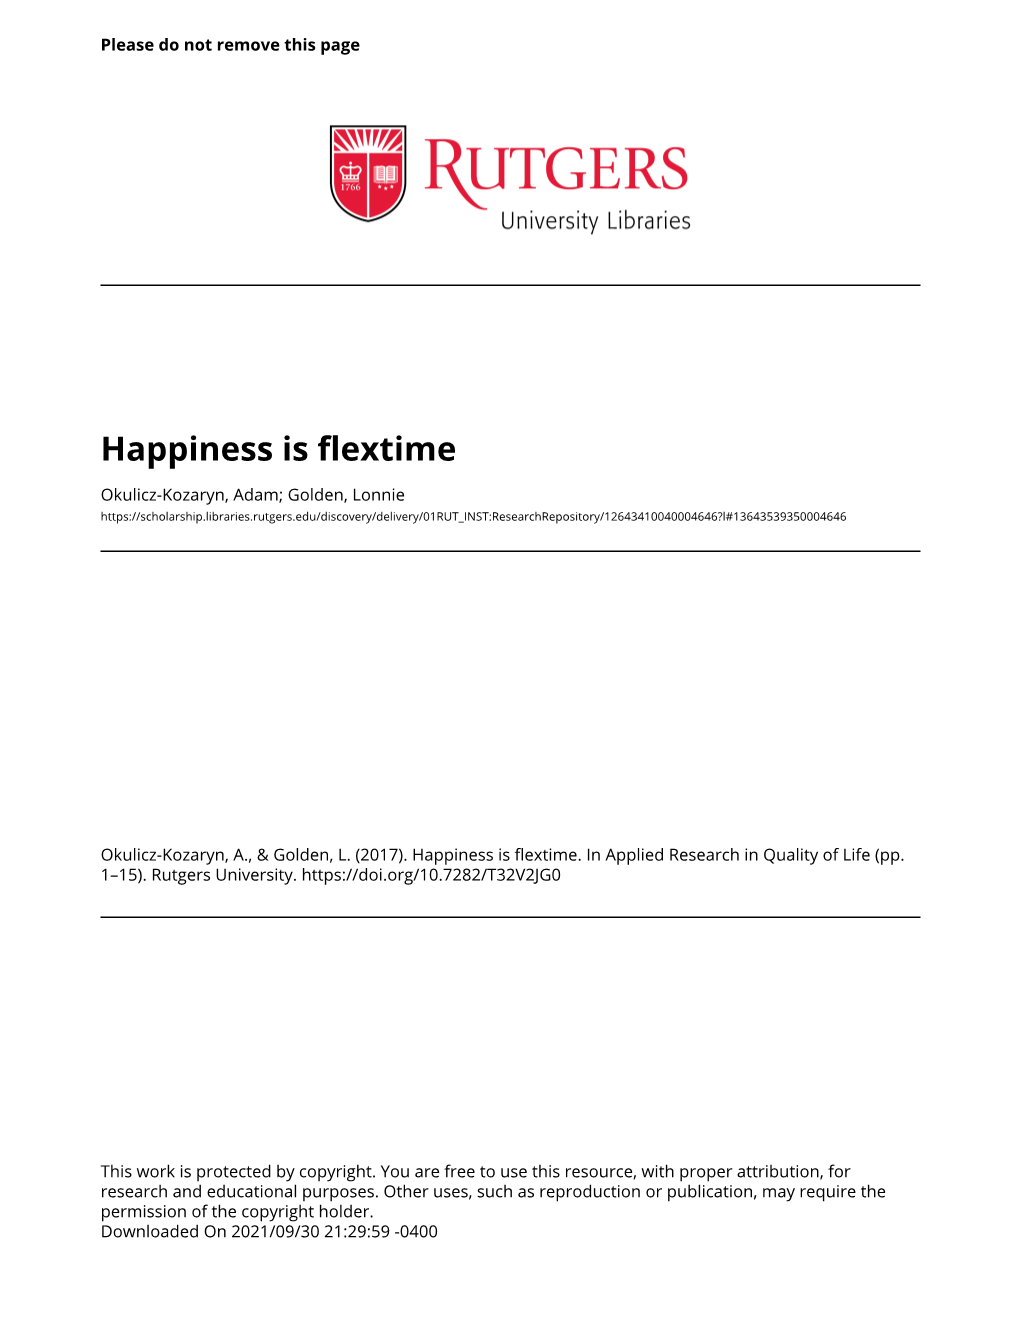 Happiness Is Flextime